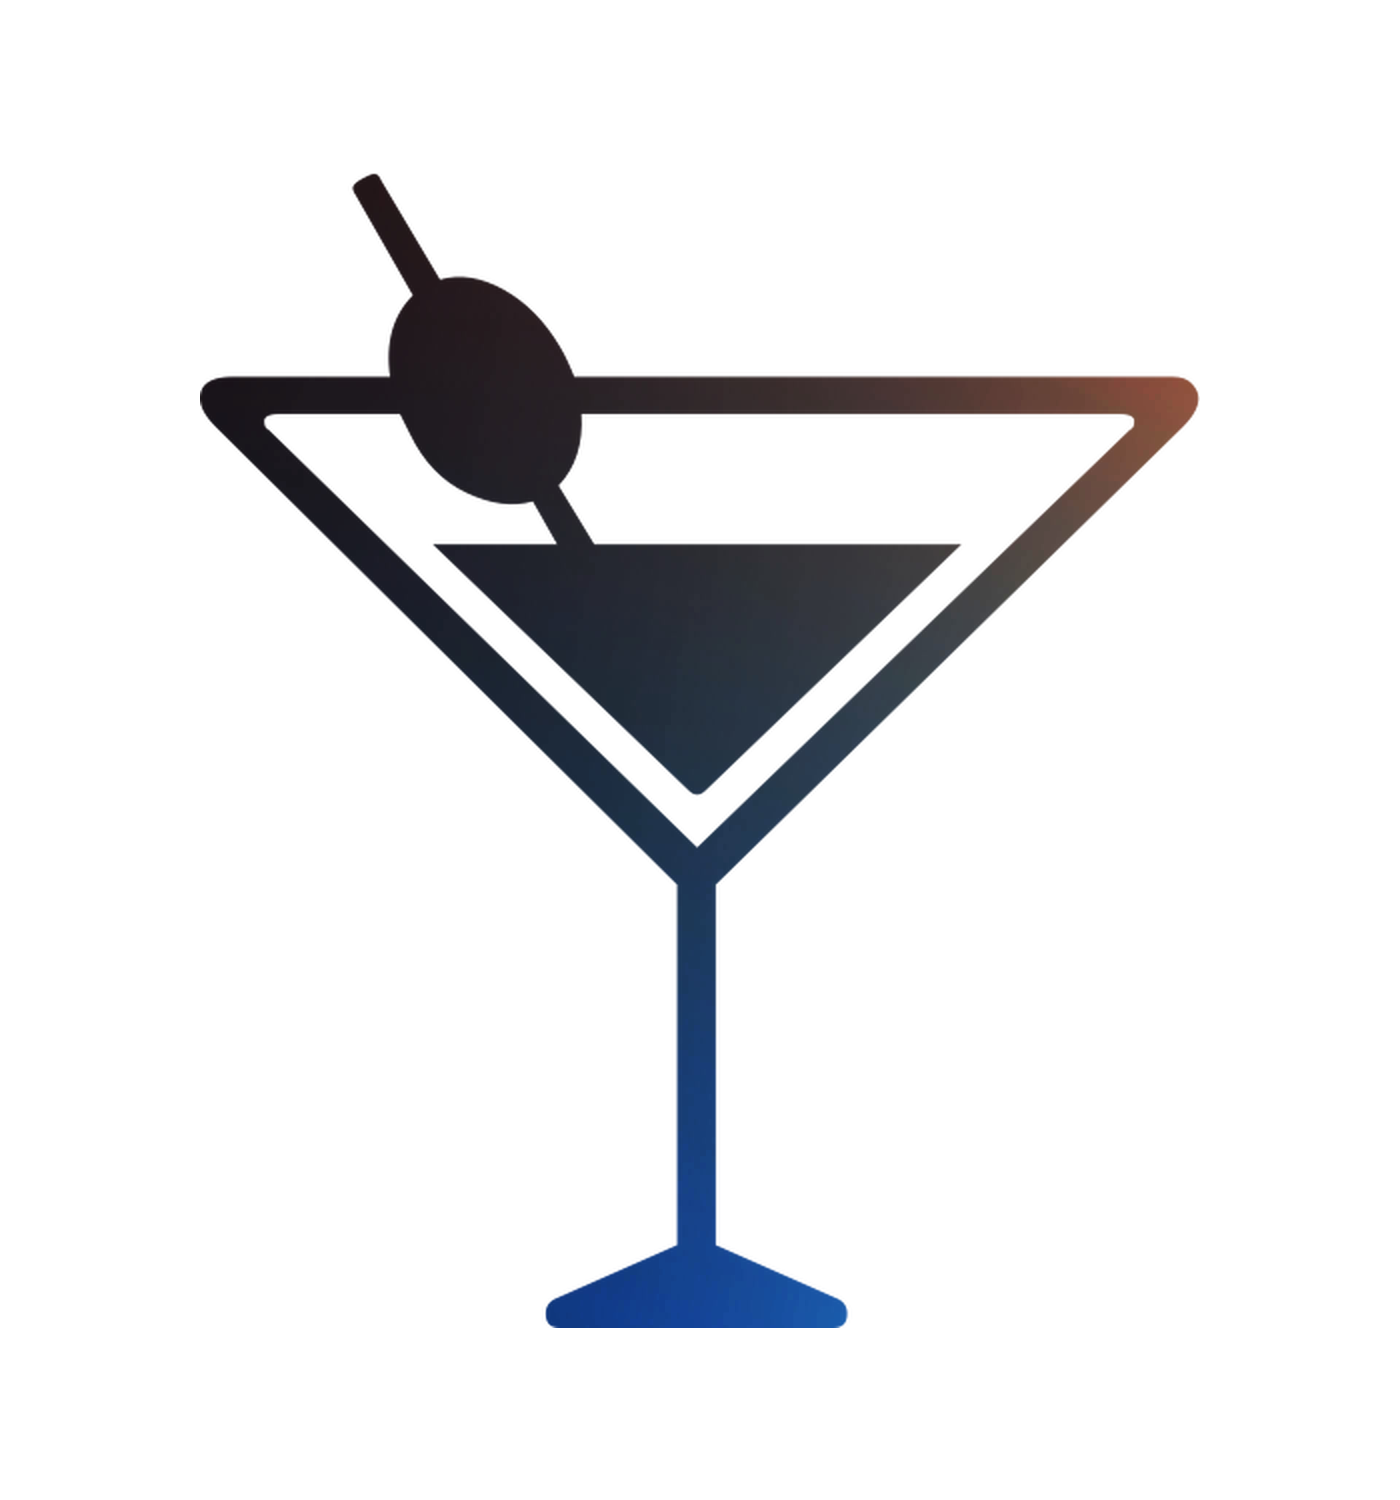 Martini Cocktail Glass Scalable Vector Graphics Png Download 1400 1500 Free Transparent Martini Png Download Clip Art Library